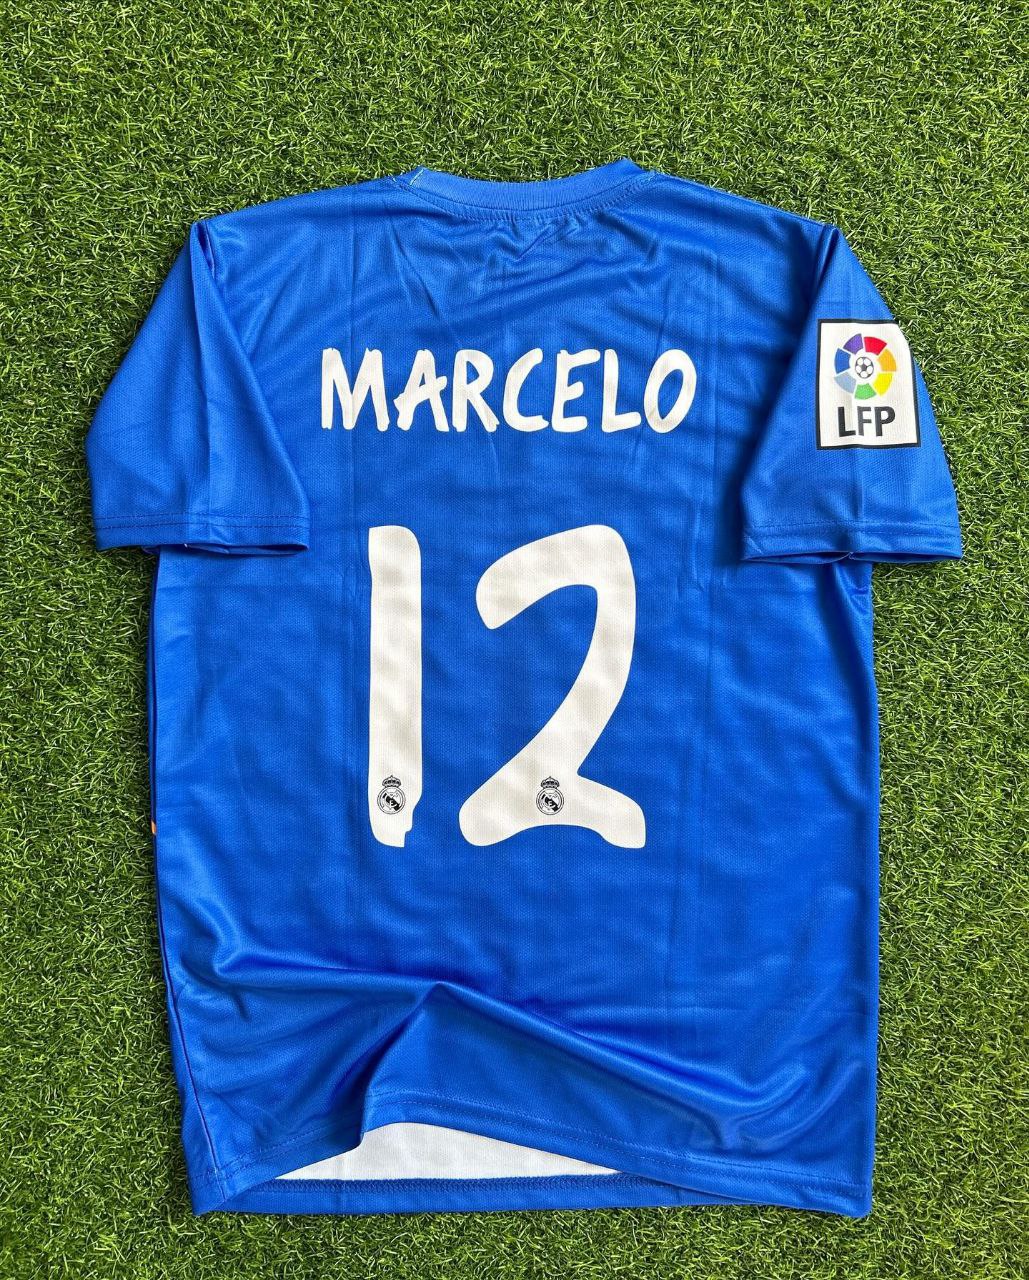 Marcelo 2013-14 Real Madrid Blue Retro Jersey